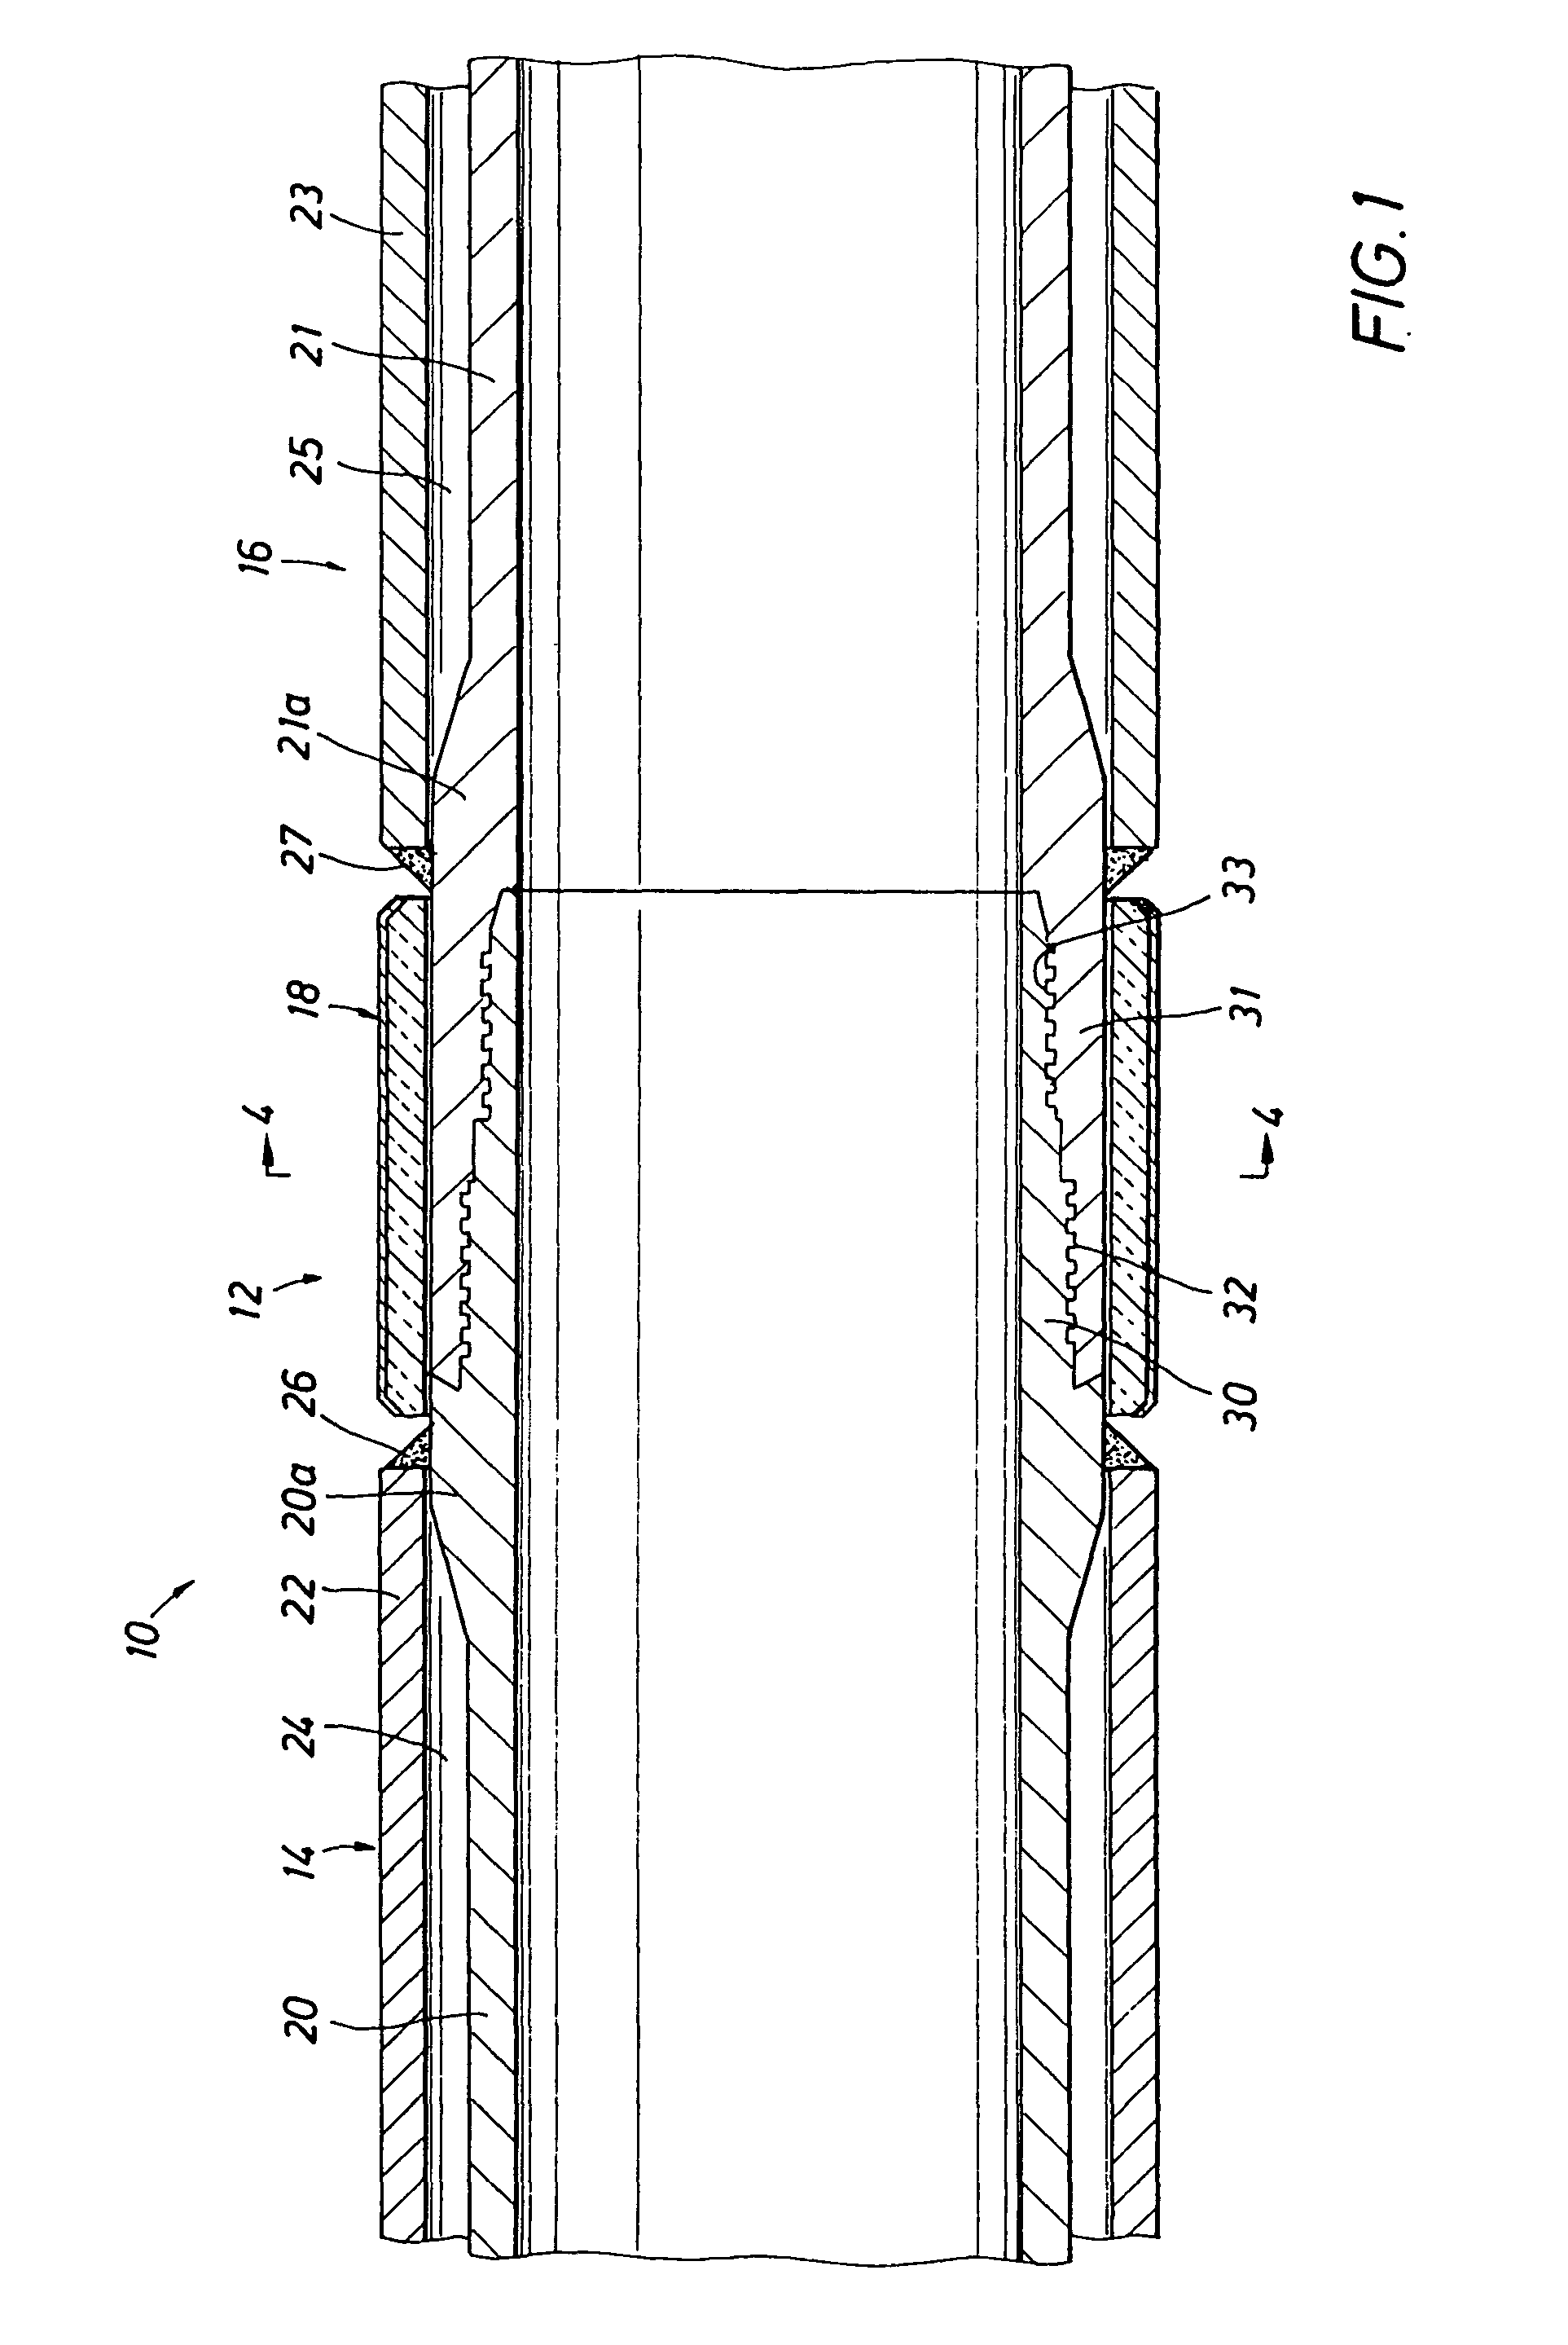 Insulated tubular assembly